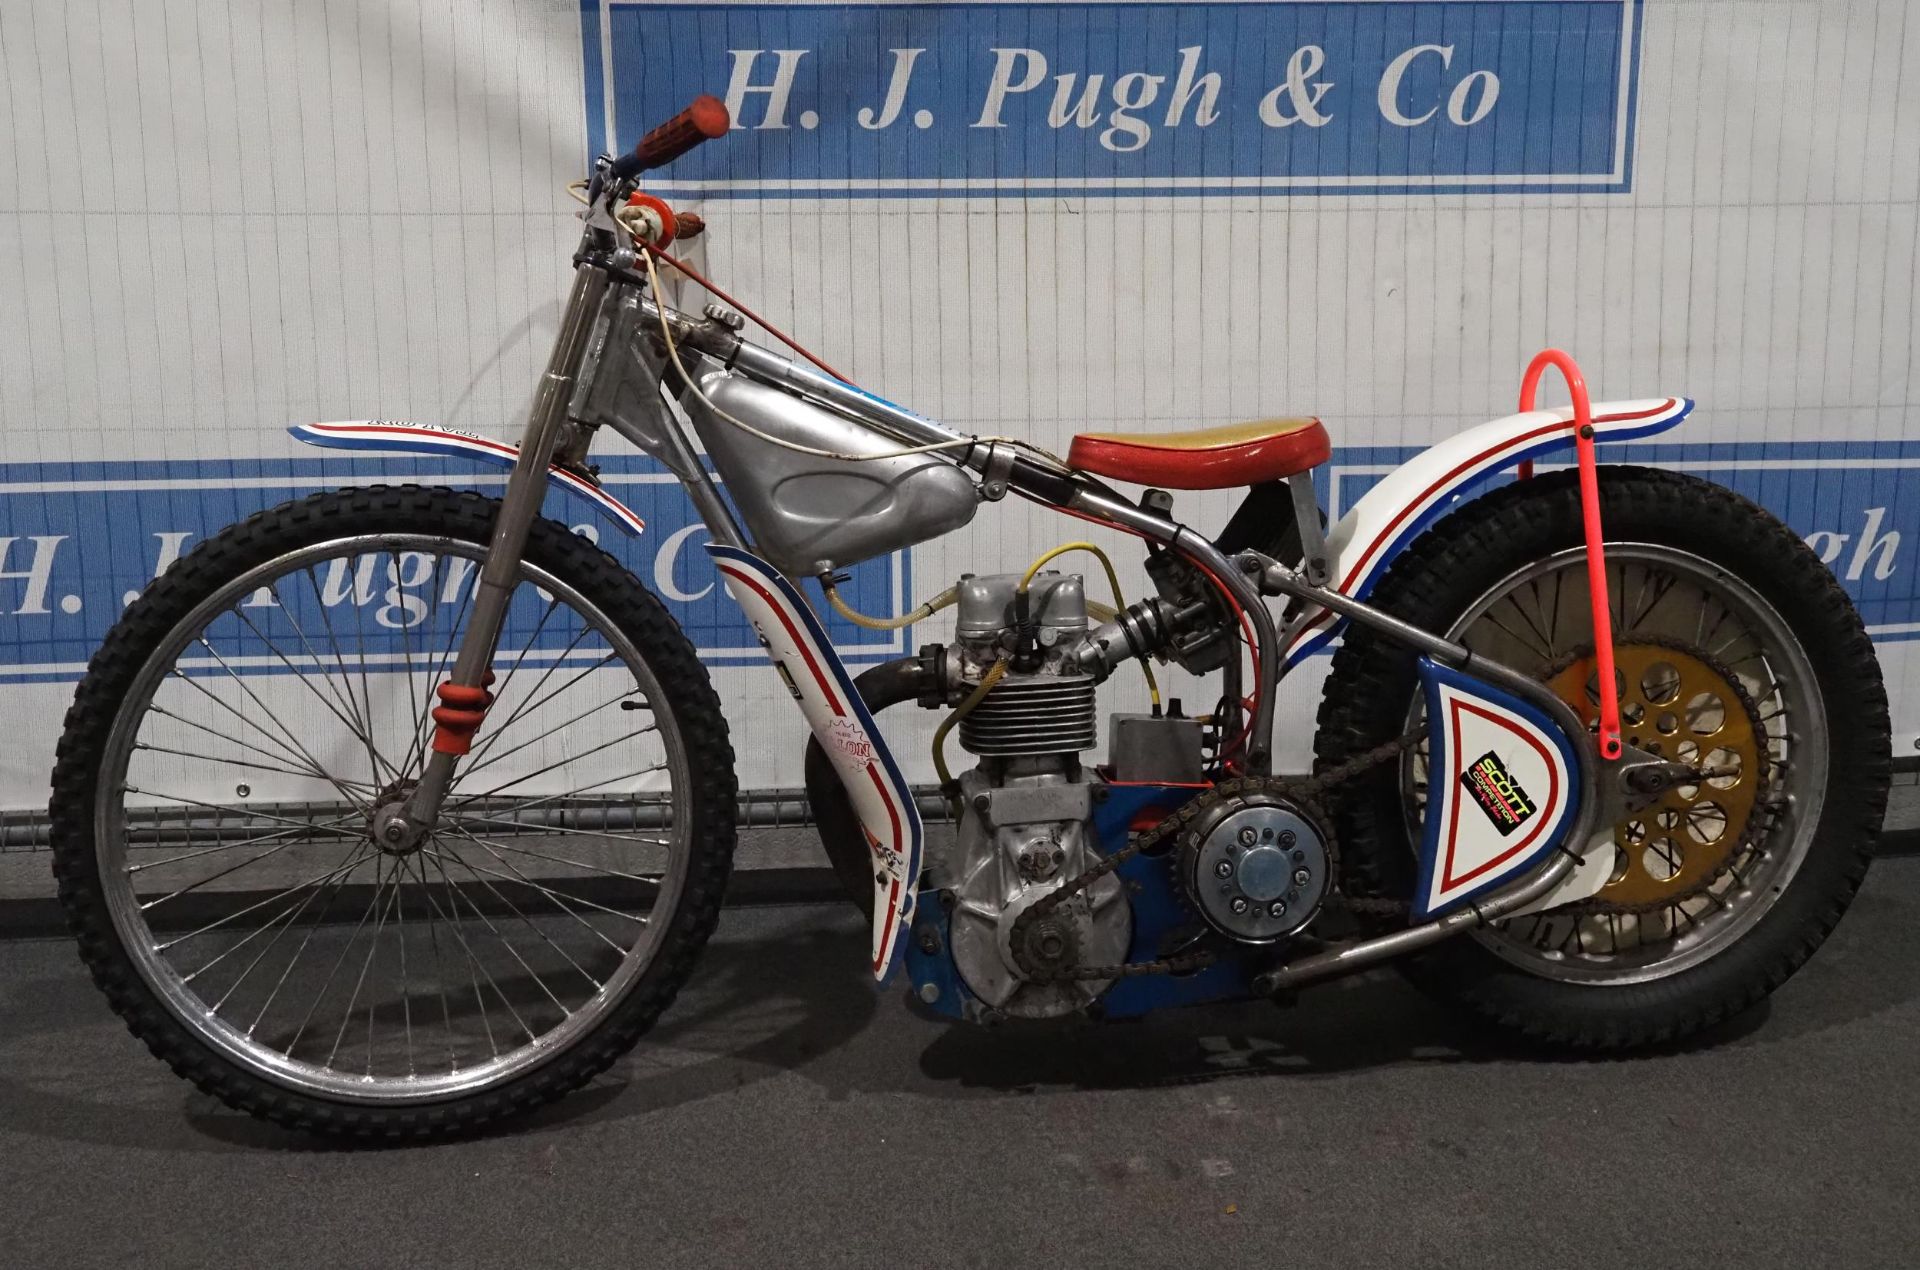 Weslake 500 speedway bike. Came from a collection, stored in a house for 5 years. Engine turns - Image 4 of 5